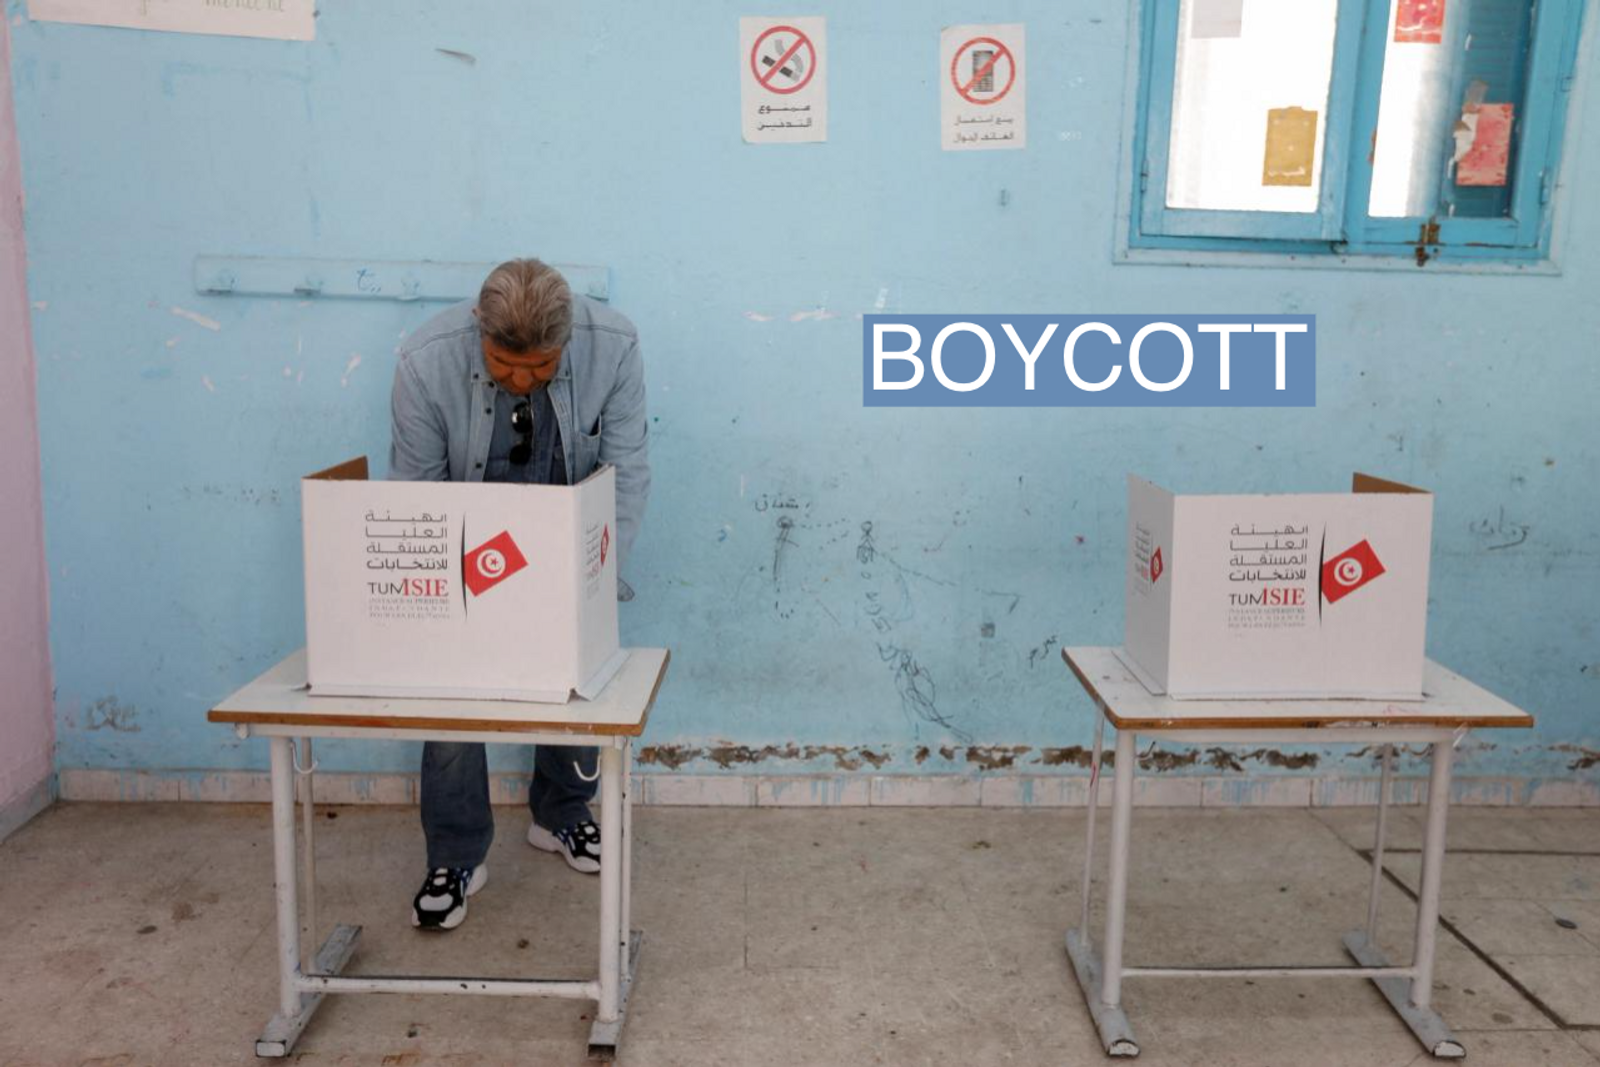 A man votes at a polling station during parliamentary election in Tunis, Tunisia December 17, 2022.